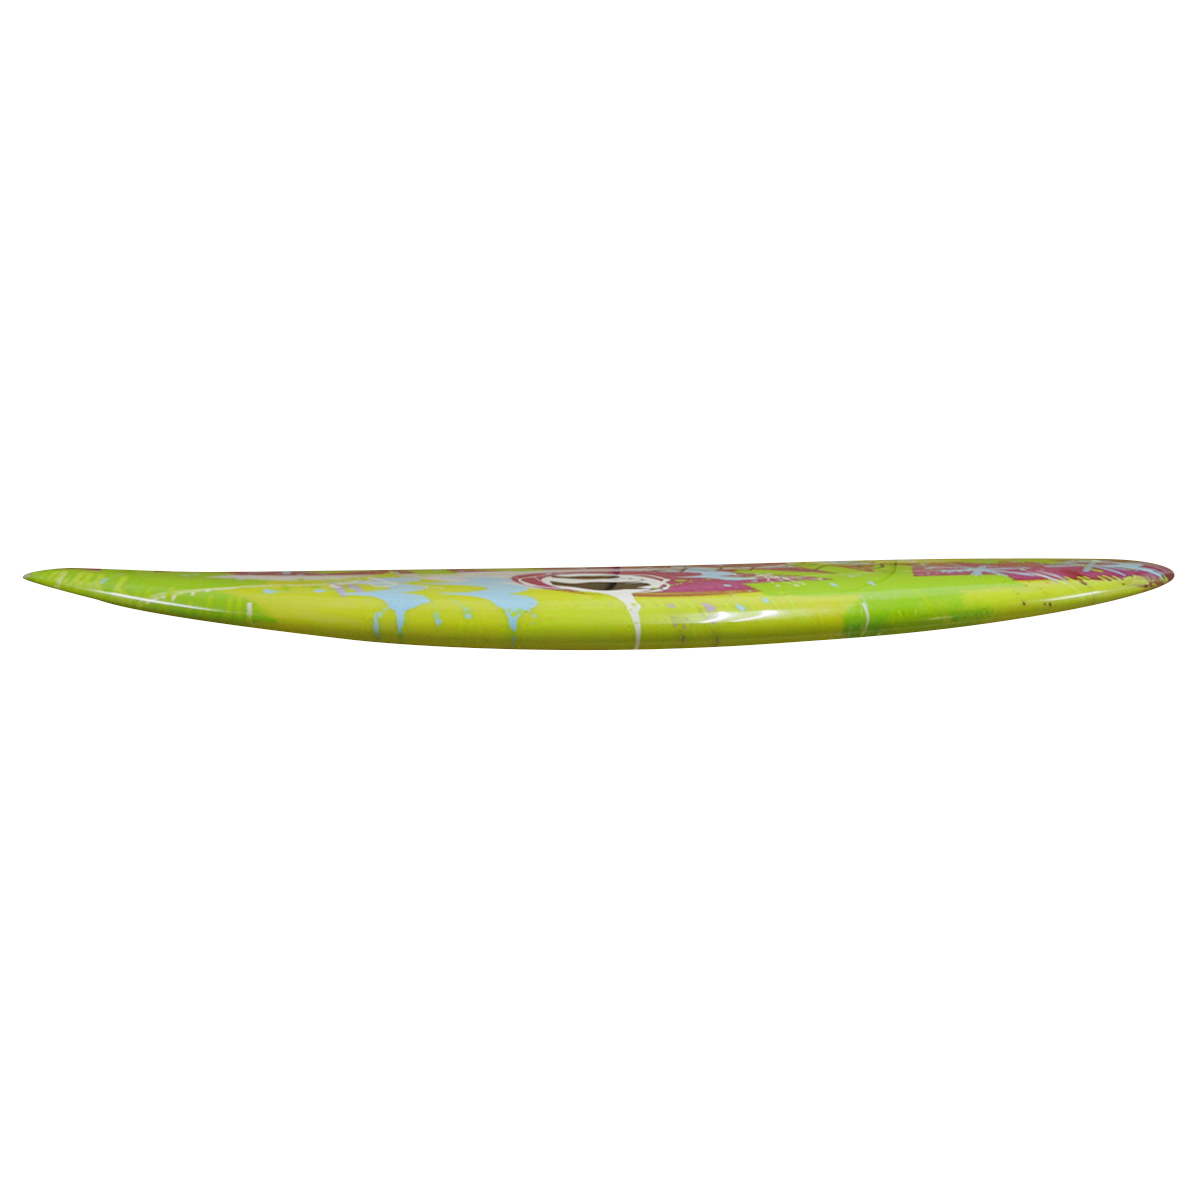 Two Crows Surfboards / Single Fin Mellow 5'9